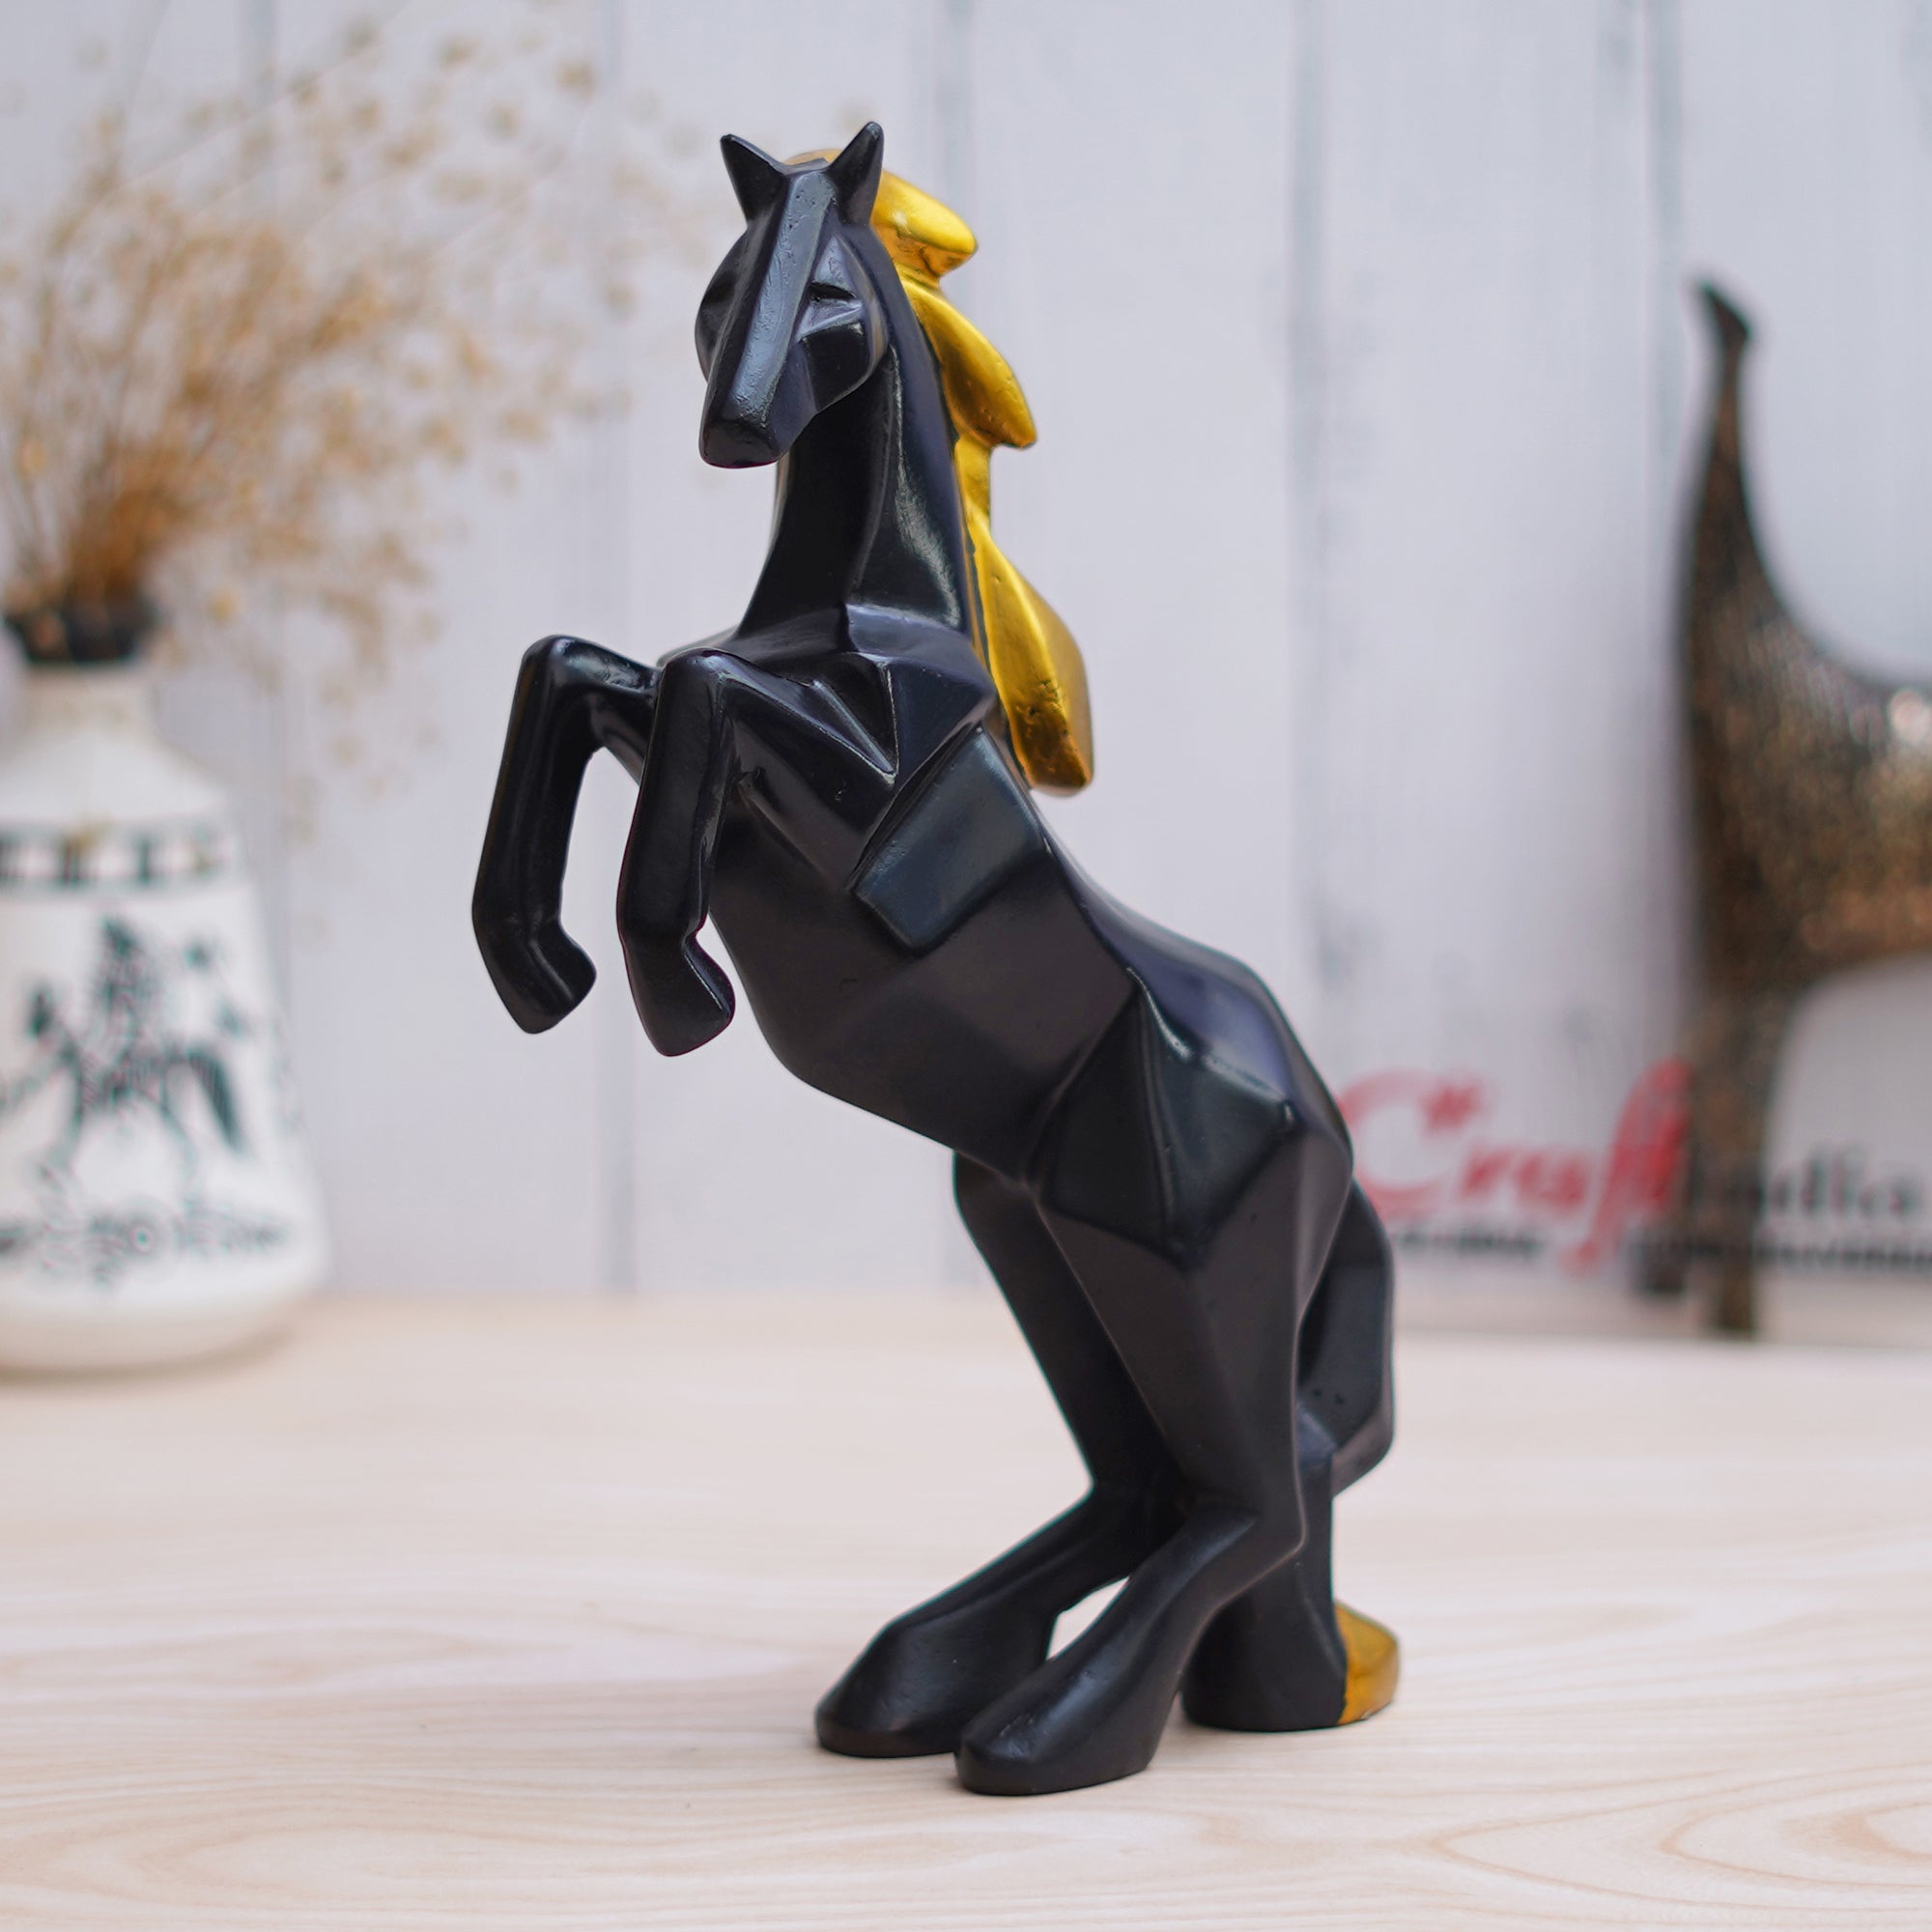 Black Polyresin Jumping Horse Statue with Golden Hair Animal Figurine 4